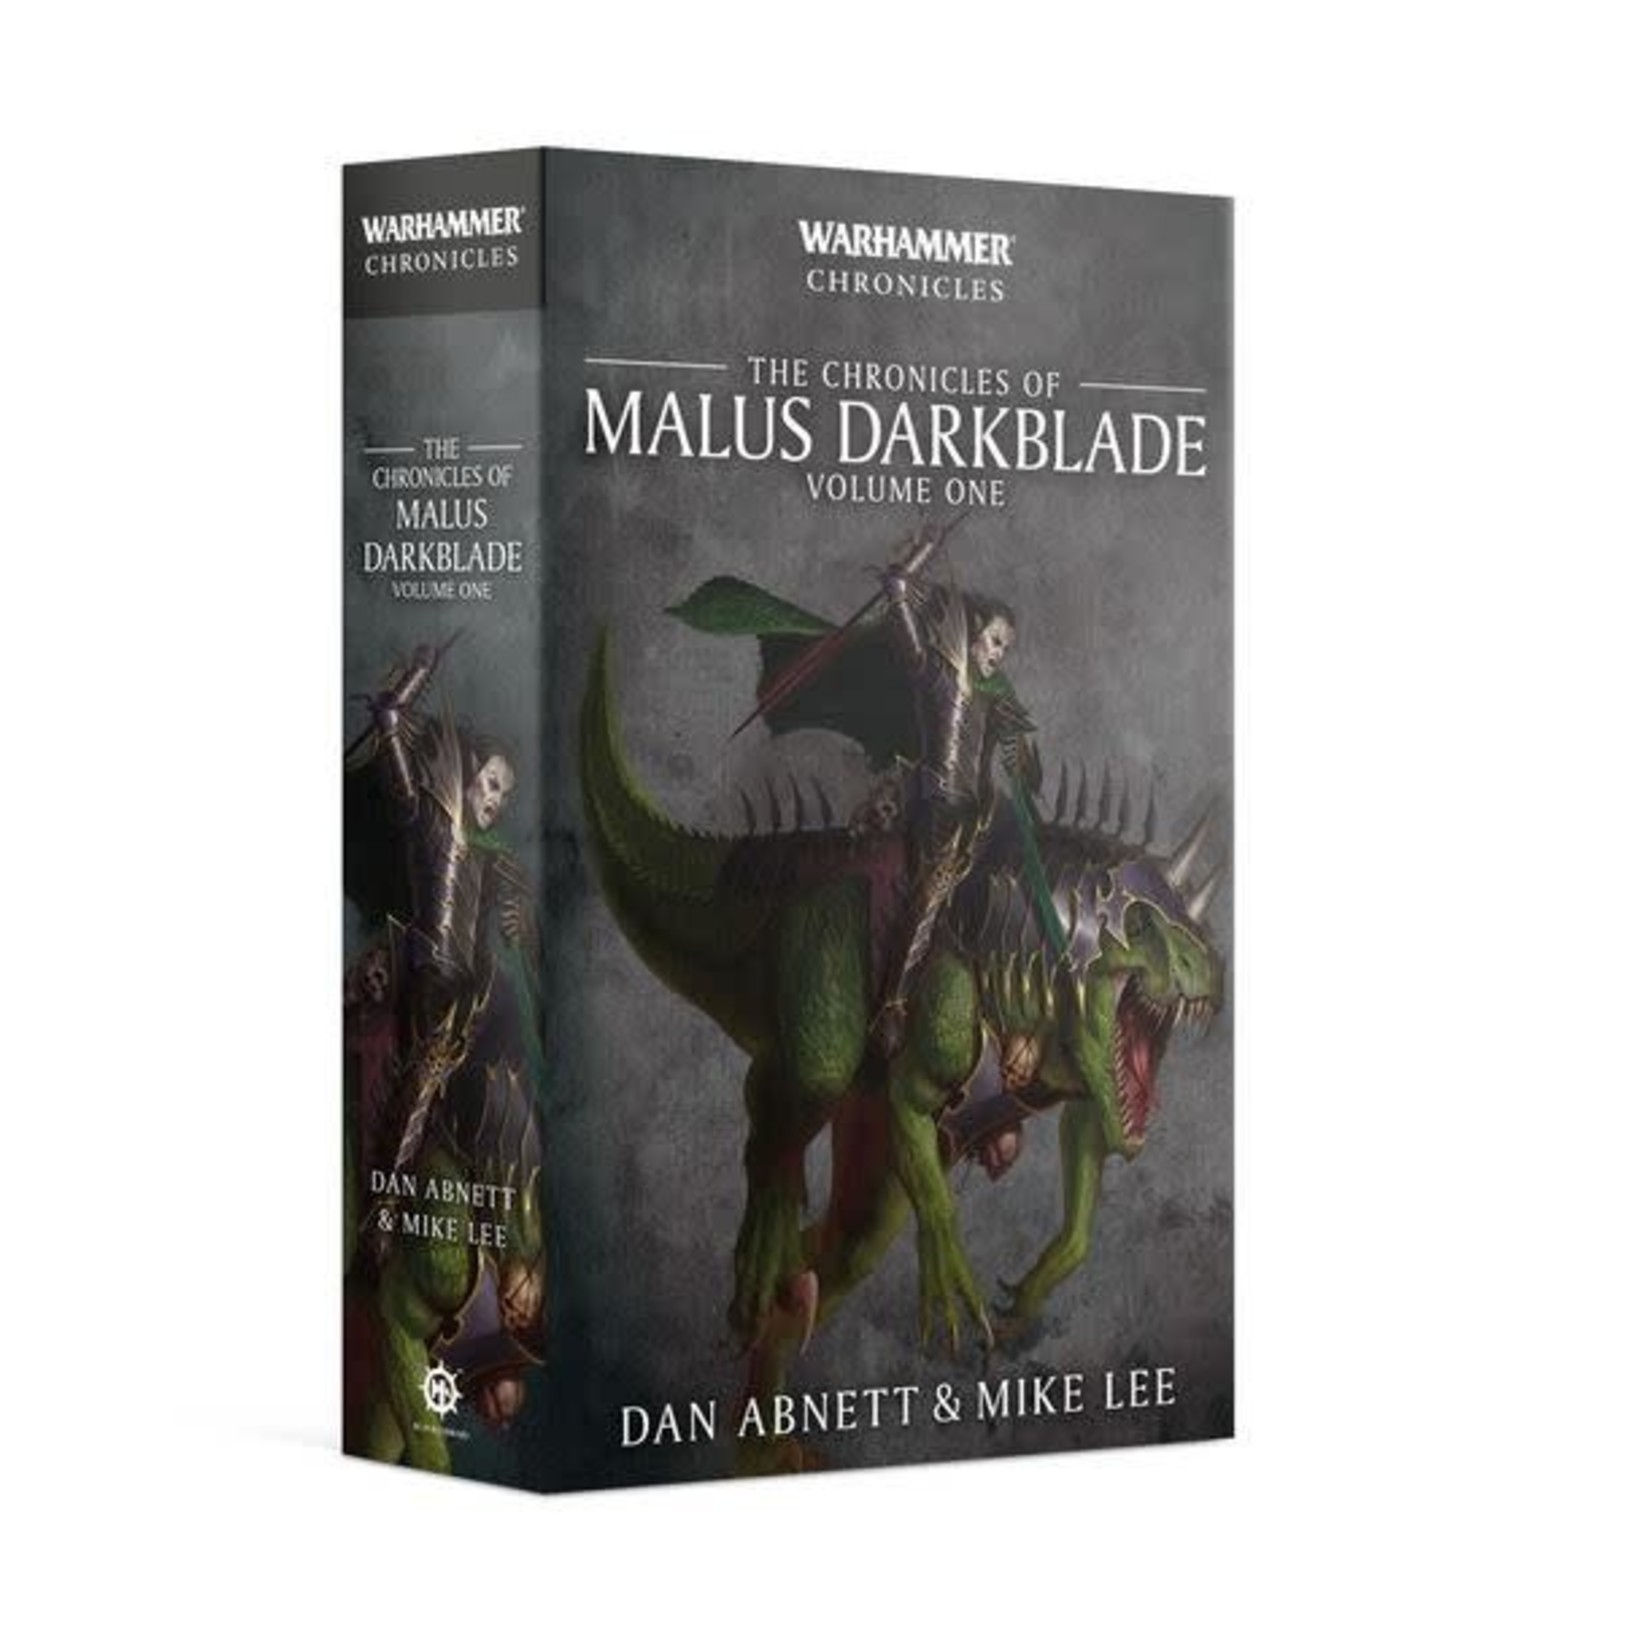 The Chronicles of Malus Darkblade Vol. 1 (Paperback)